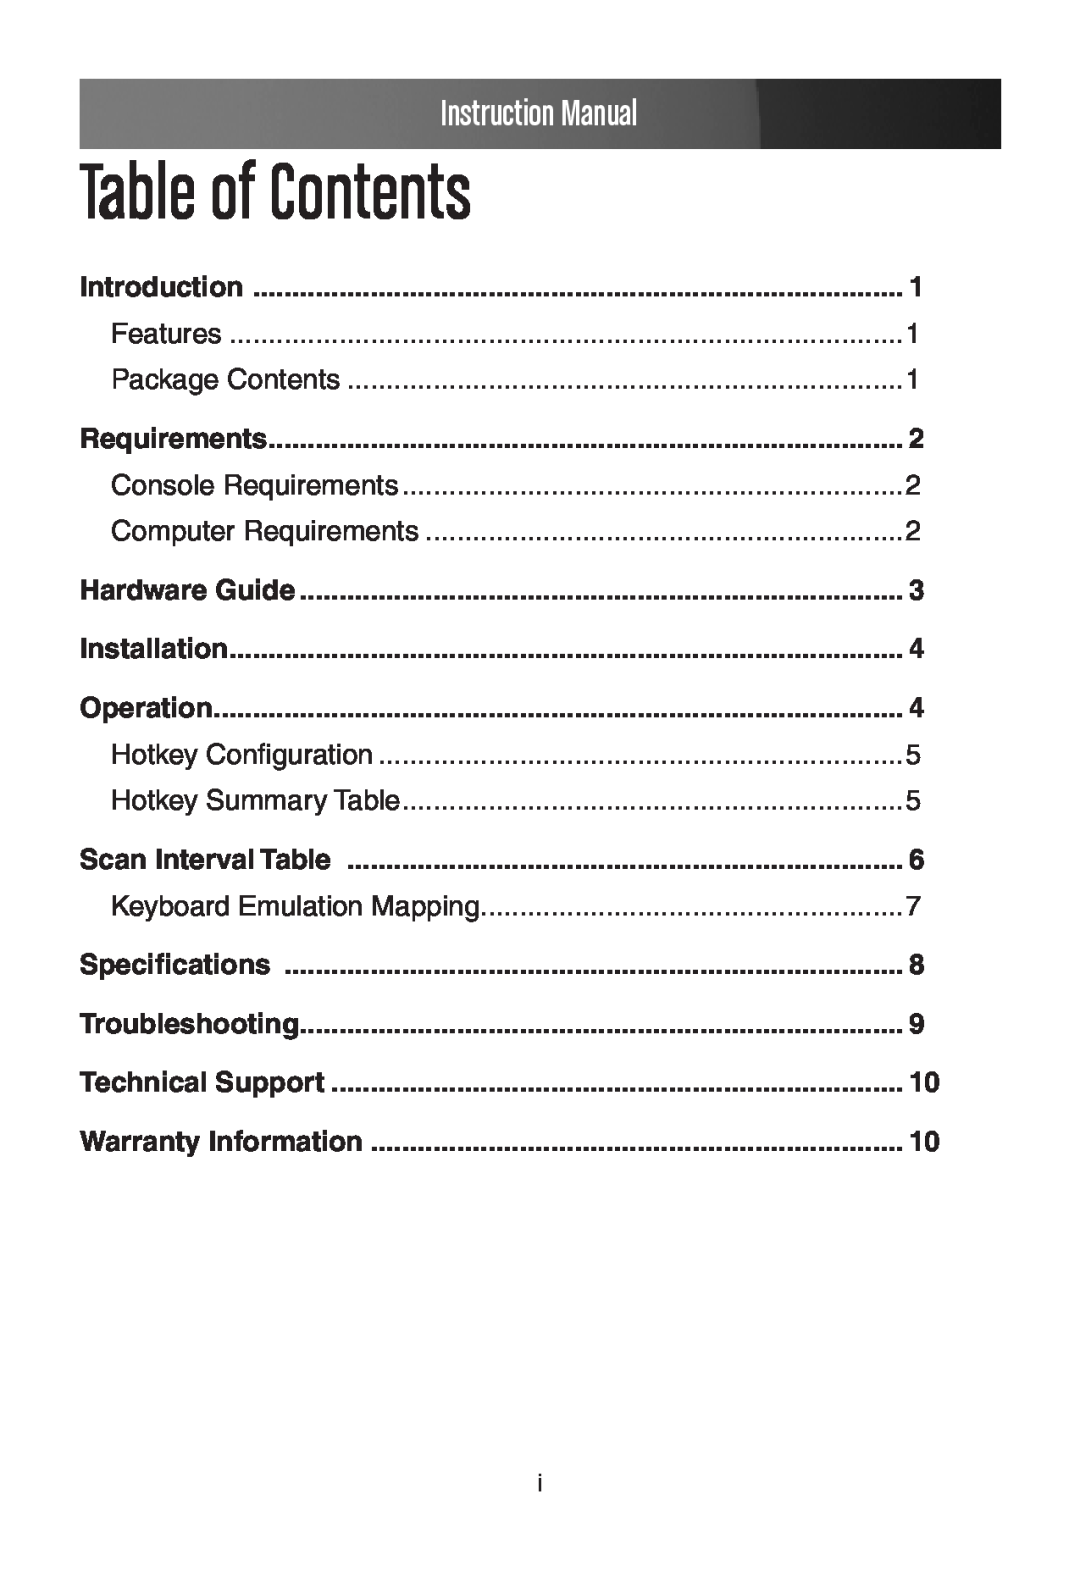 StarTech.com SV215MICUSBA Instruction Manual, Features, Package Contents, Console Requirements, Computer Requirements 